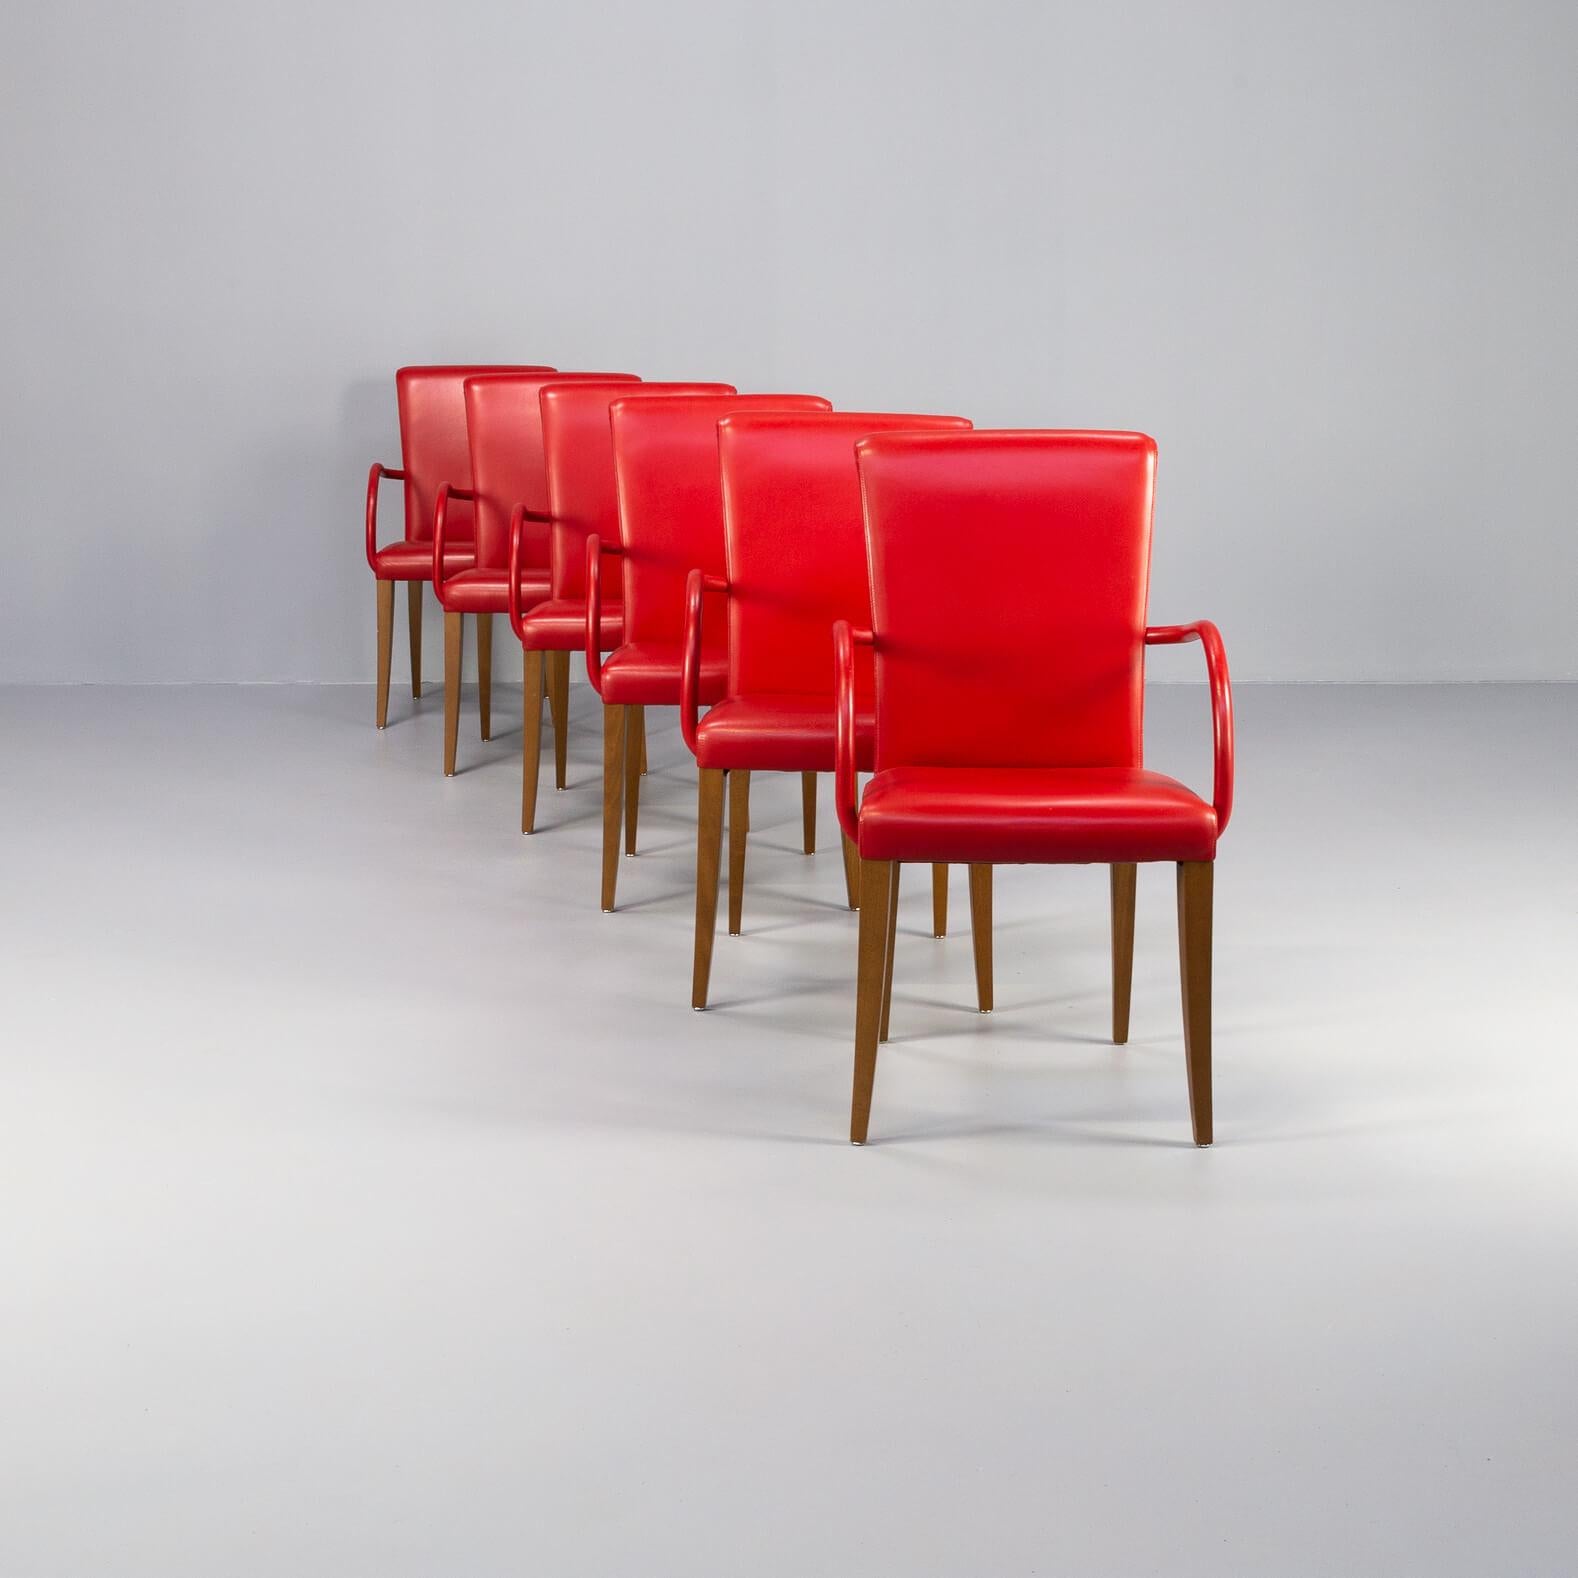 The Vittoria chair, designed by Poltrona Frau R&D, stands out for its original backrest which terminates with a subtle open spiral and traditional raised edging. Aesthetic elements historically associated with the Poltrona Frau style. The Vittoria